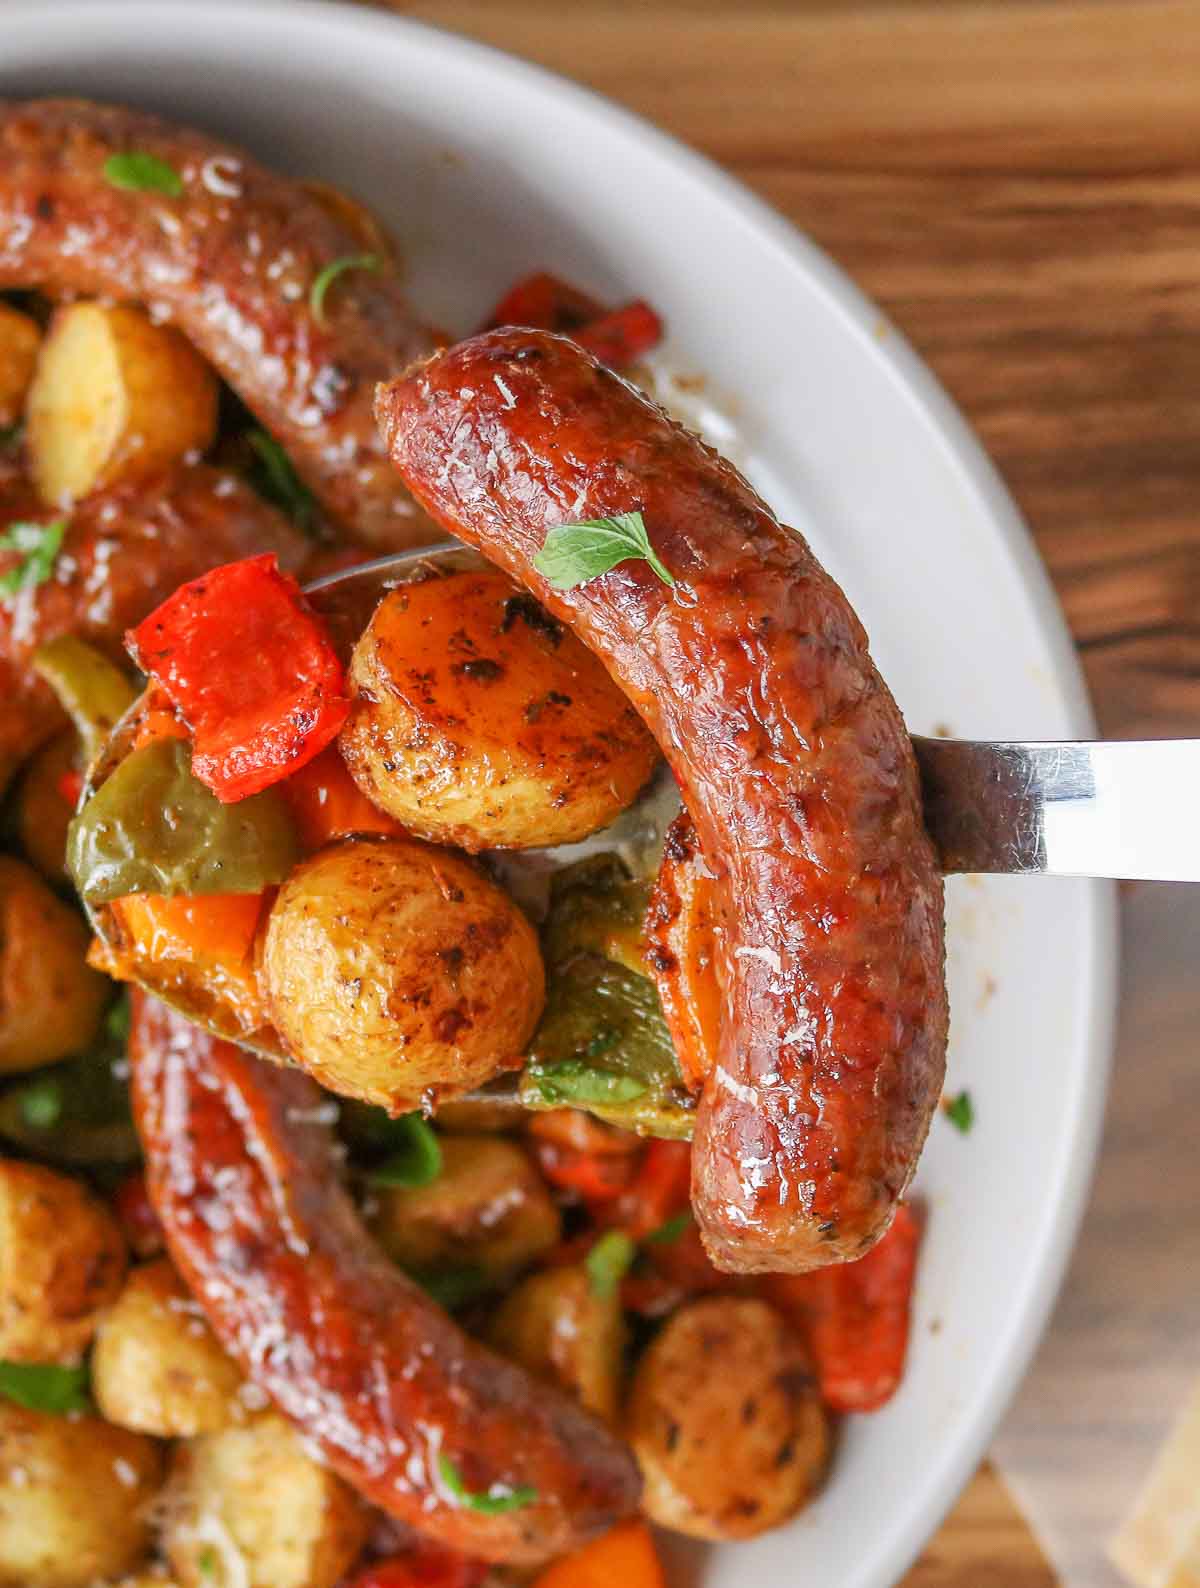 Sausage and veggies on a serving spoon.